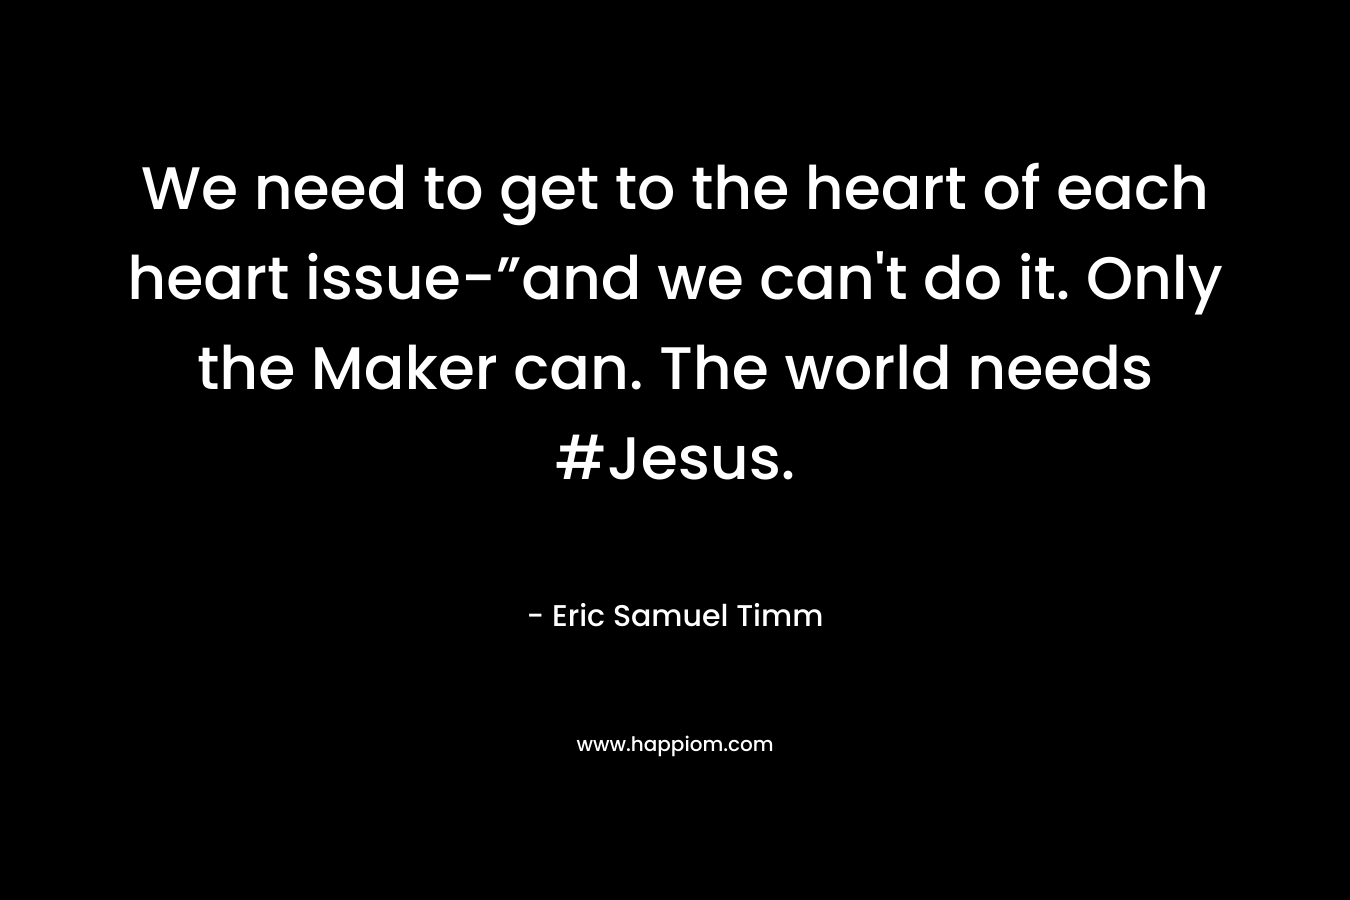 We need to get to the heart of each heart issue-”and we can't do it. Only the Maker can. The world needs #Jesus.